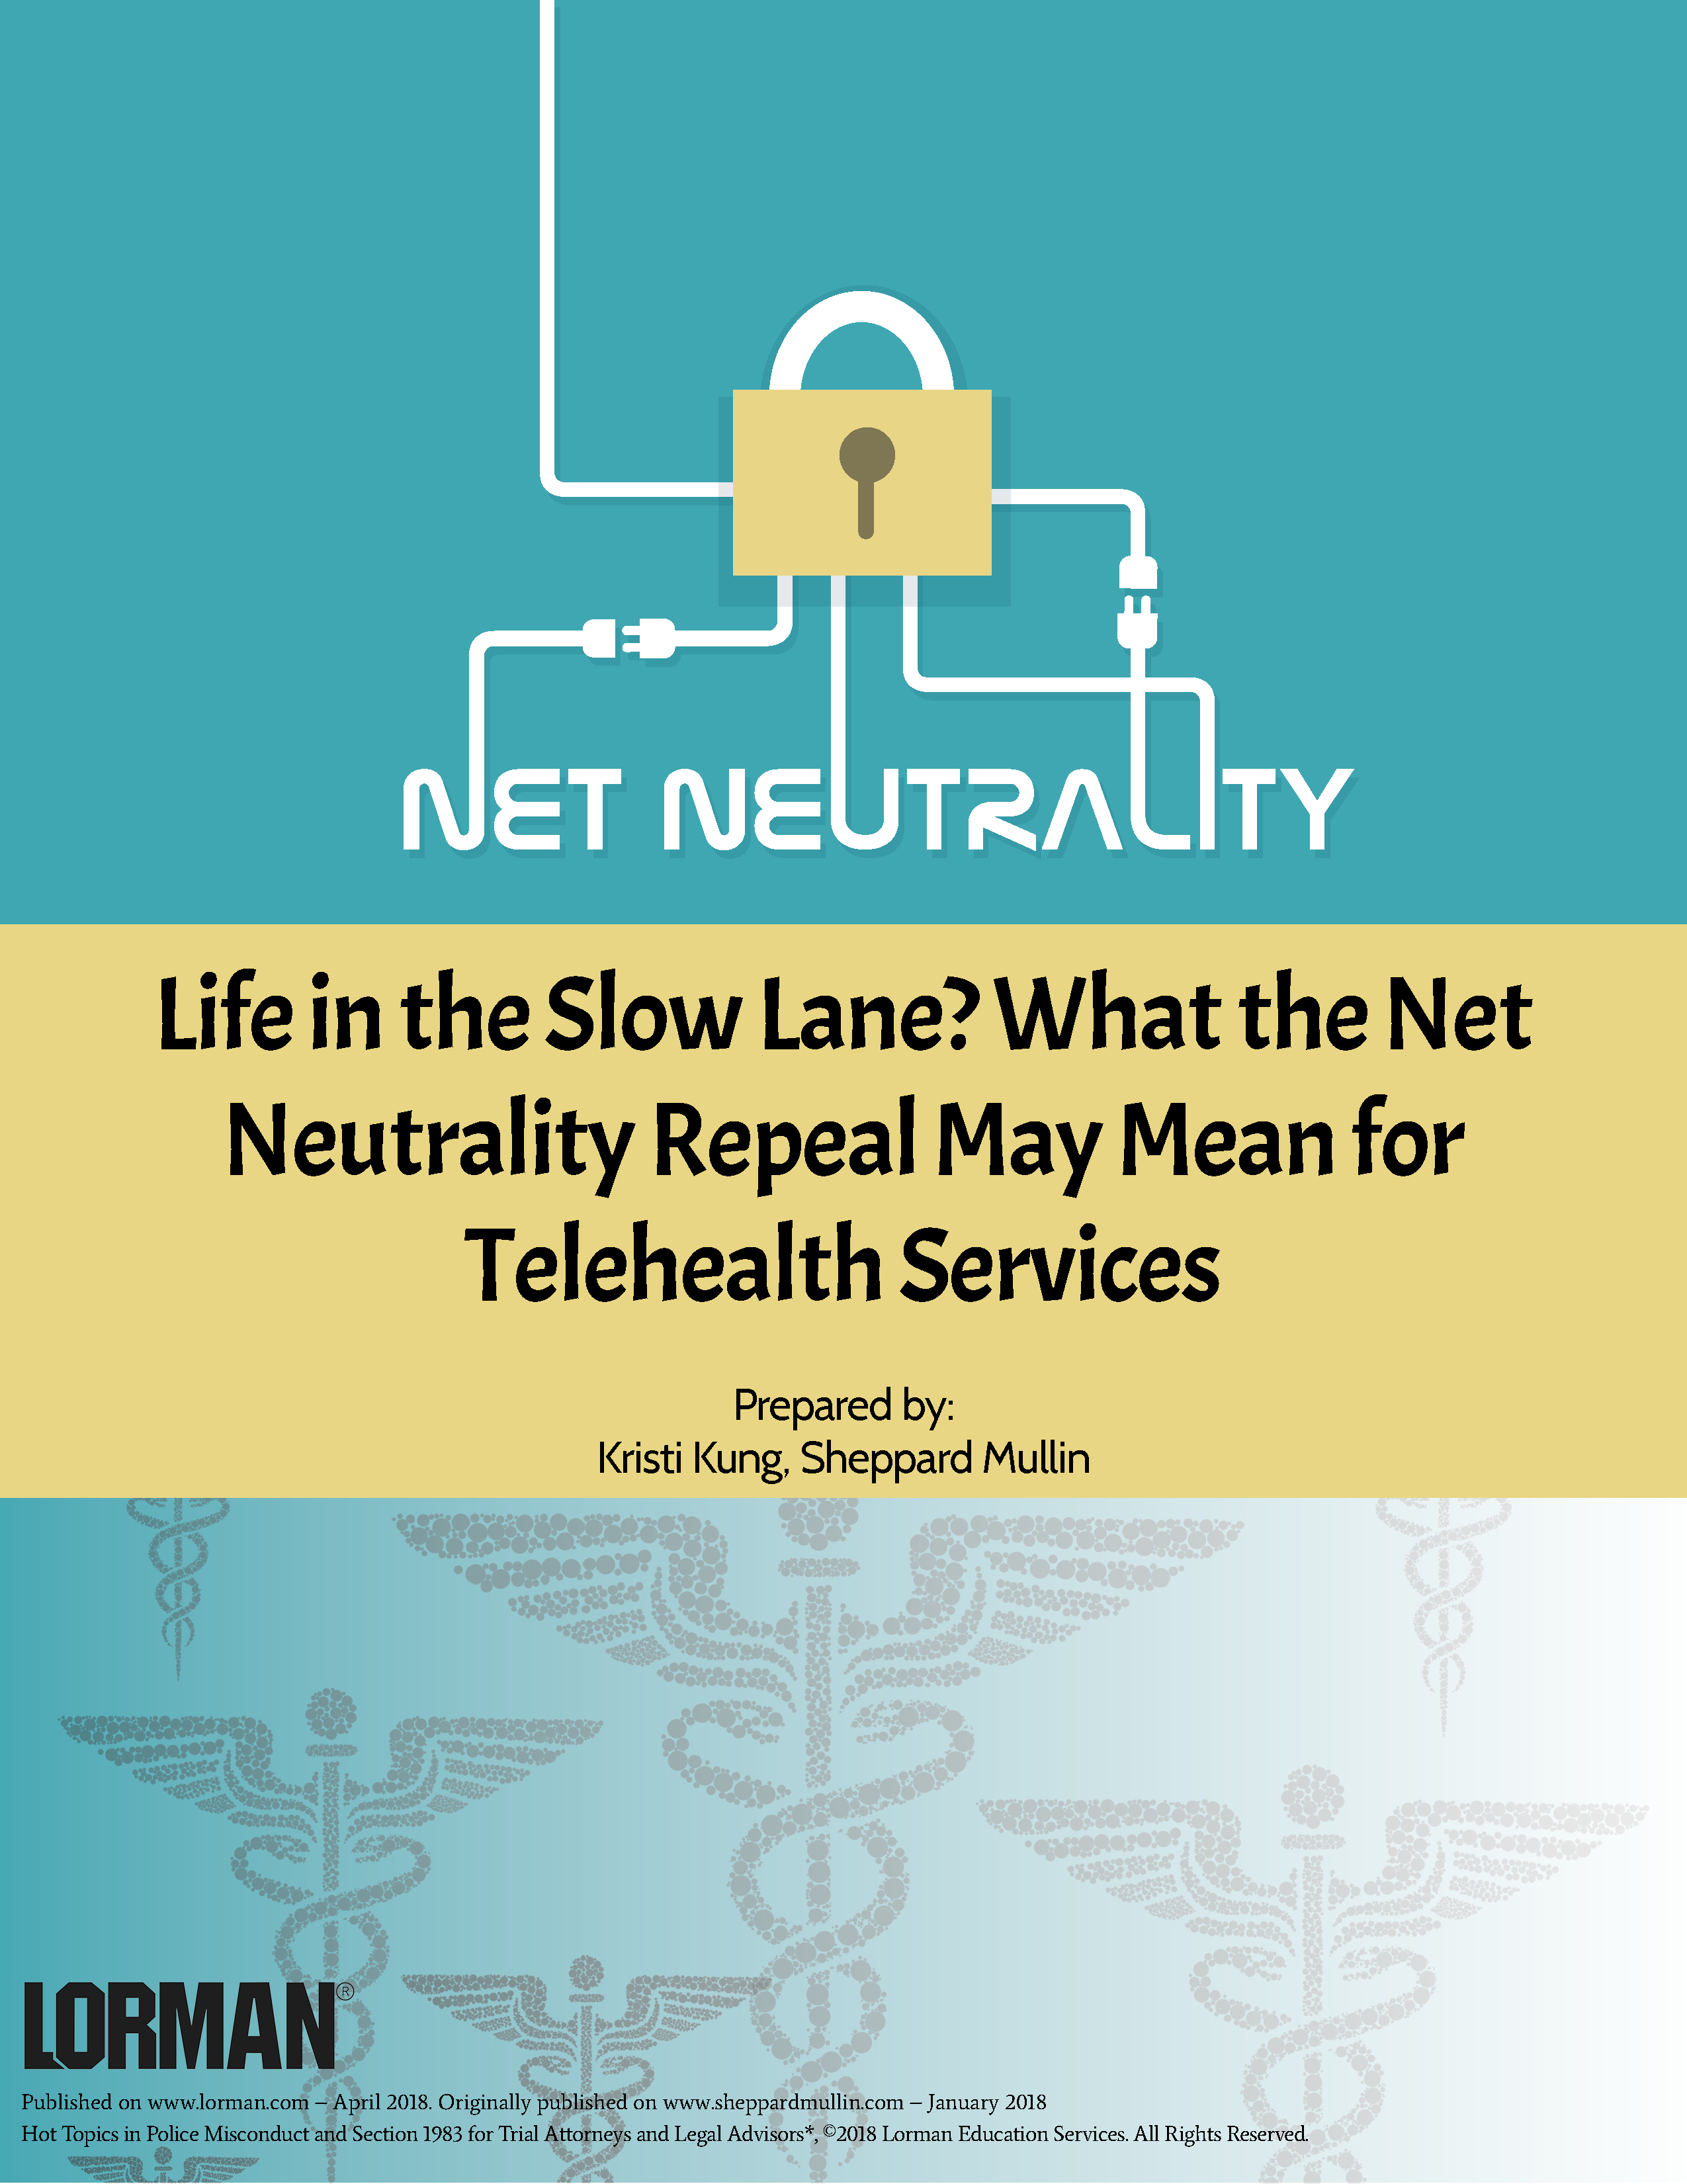 Life in the Slow Lane? What the Net Neutrality Repeal May Mean for Telehealth Services